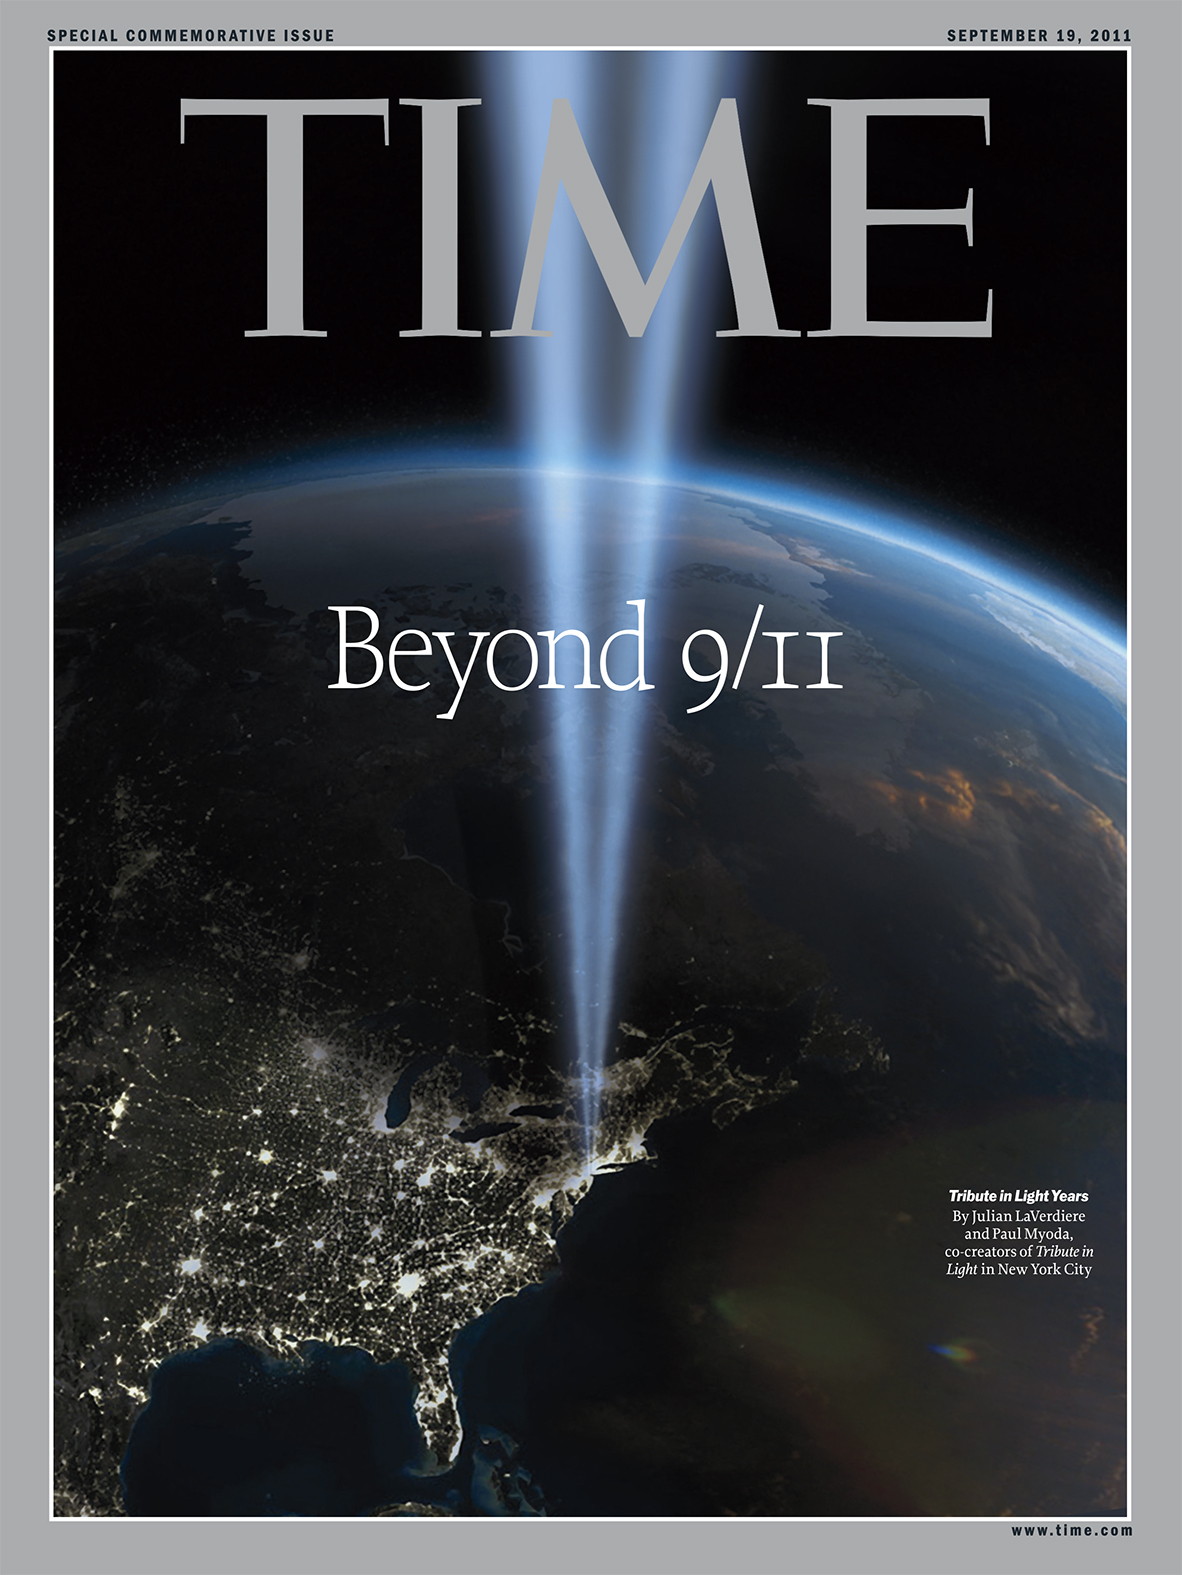 The Sept. 19, 2011 issue of TIME magazine.